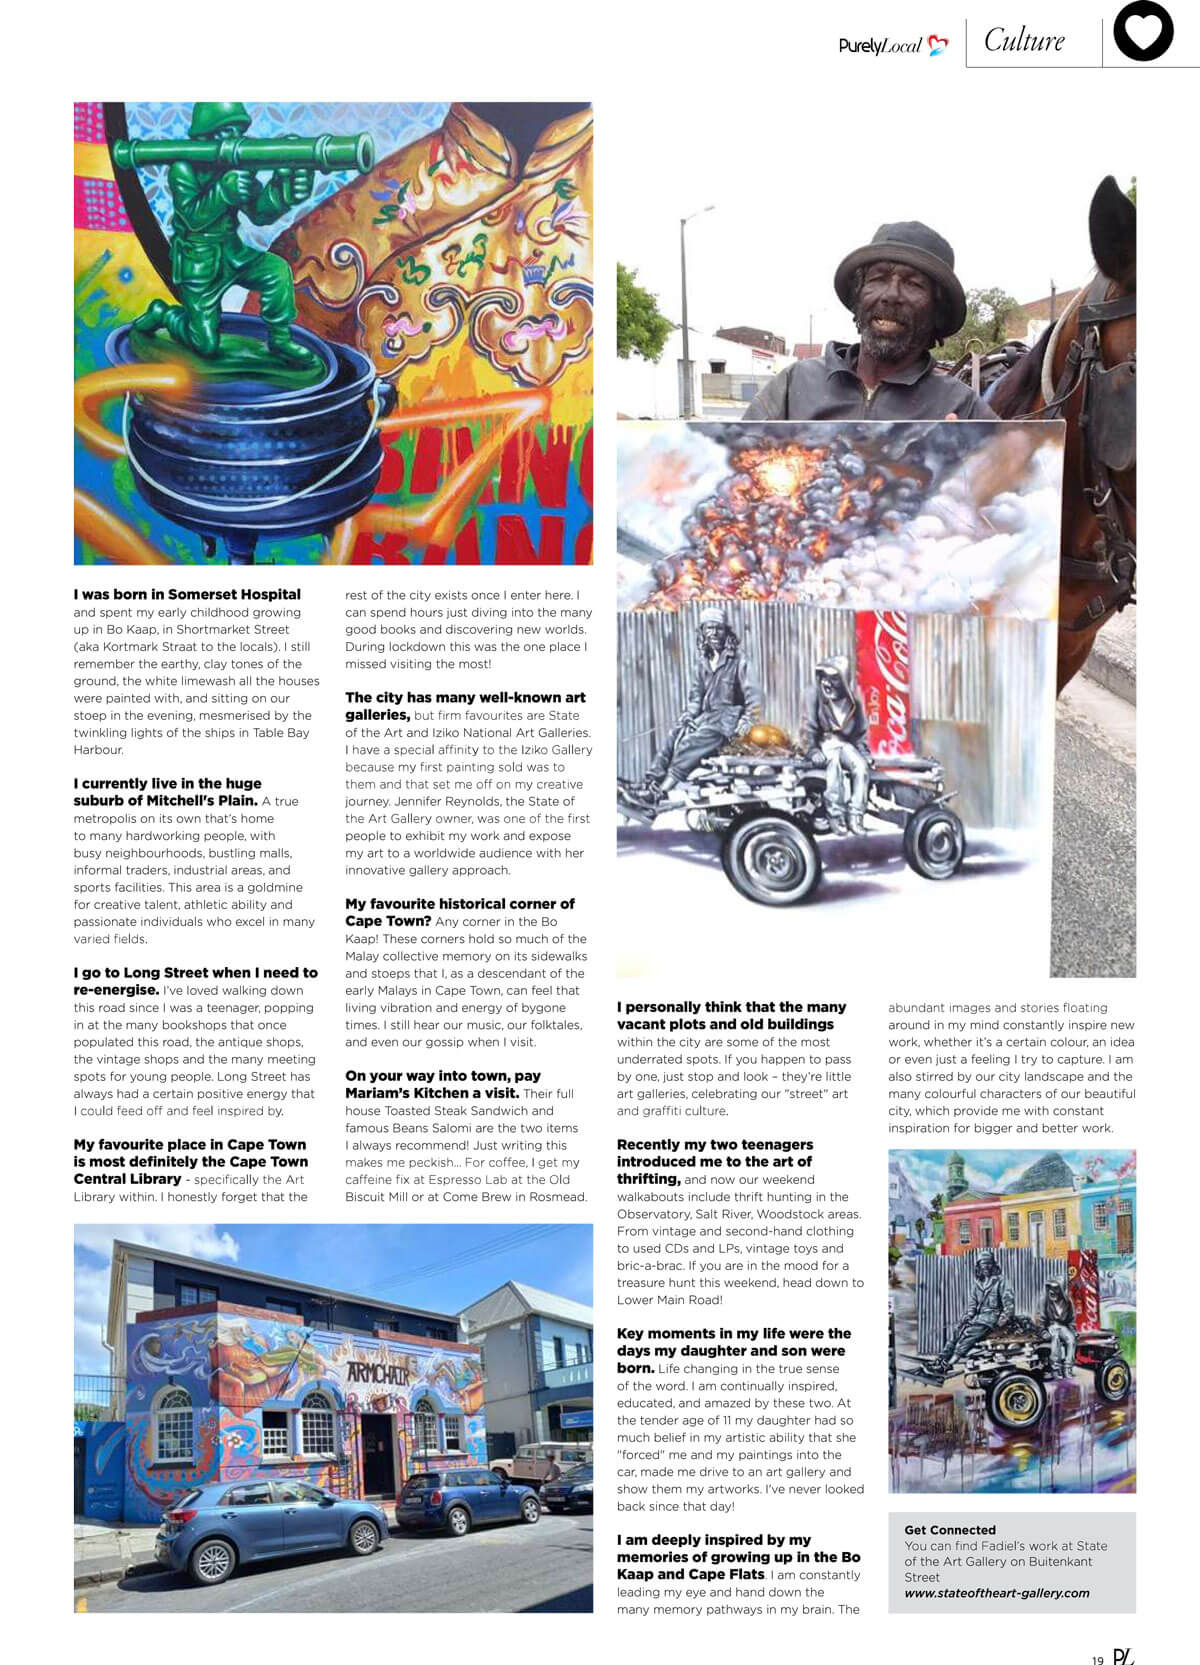 Fadiel Hermans interview in Purely Local Magazine